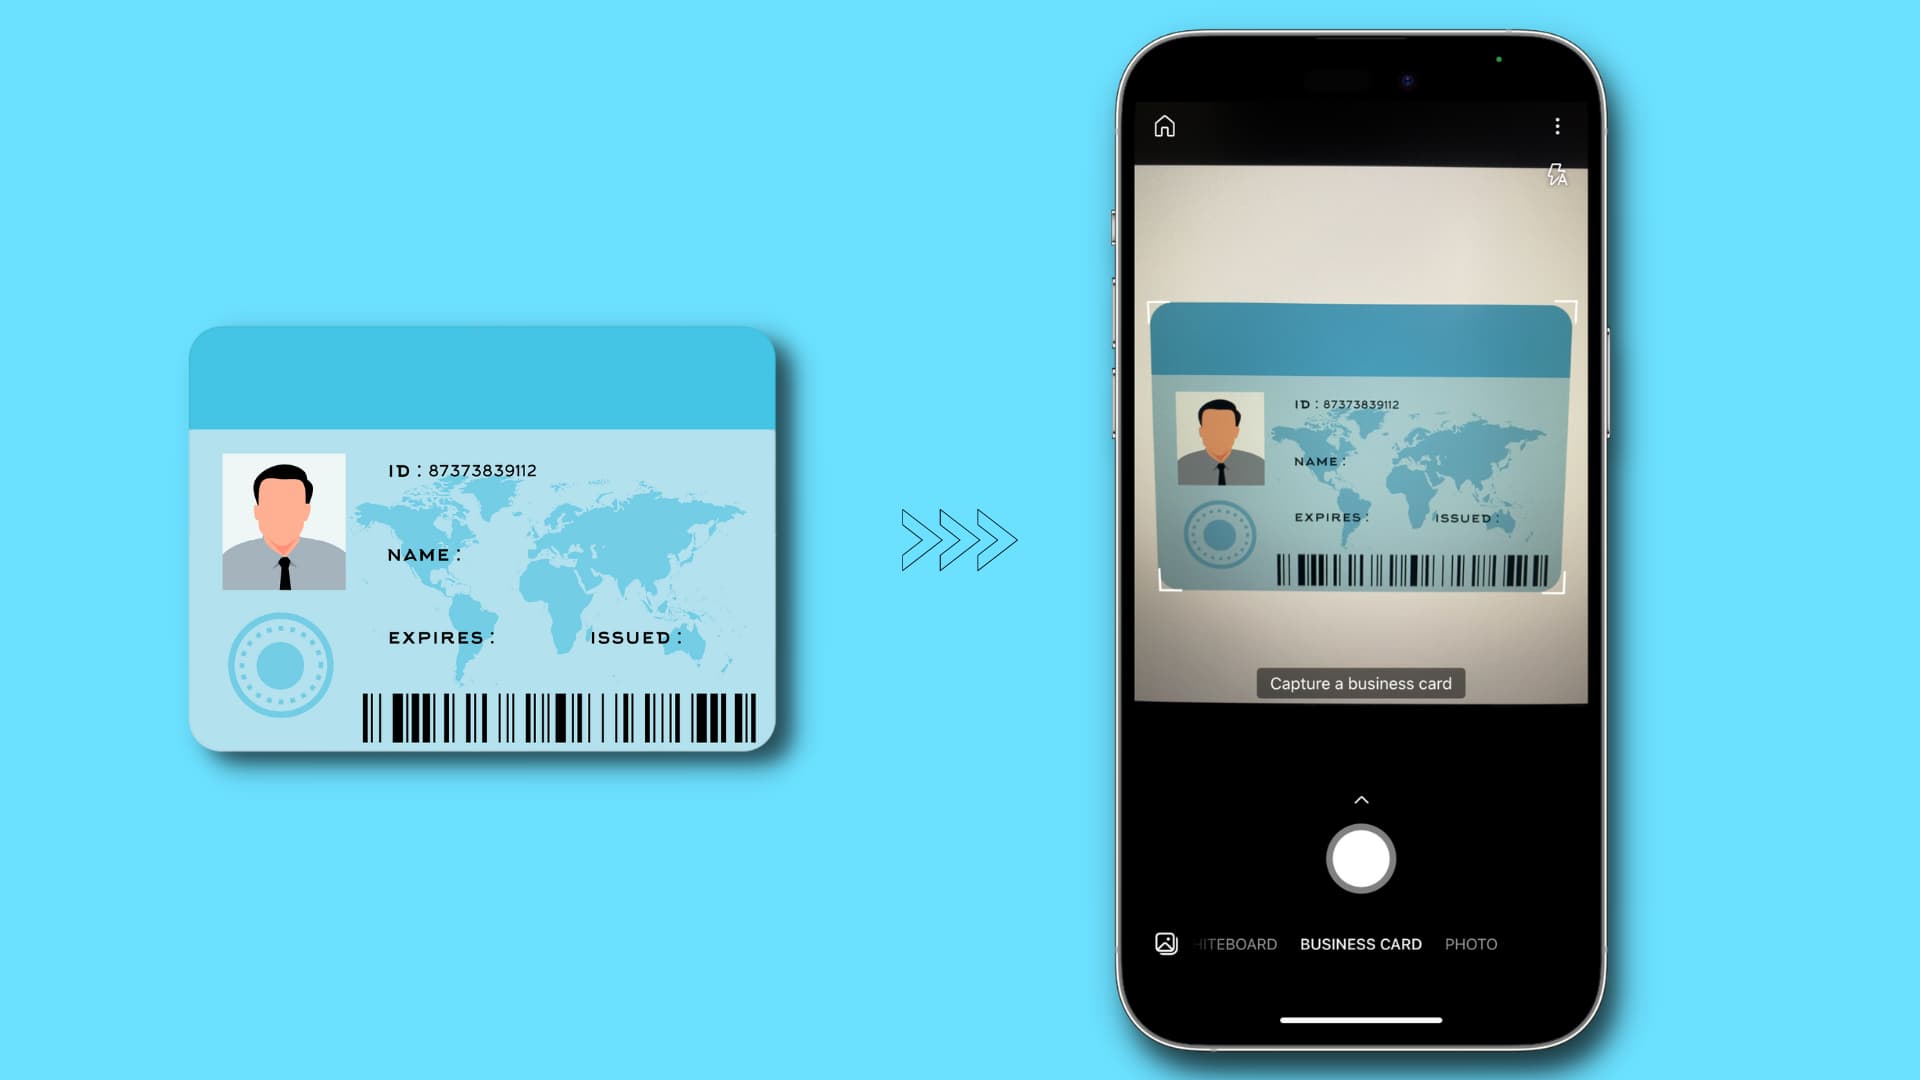 How to turn your physical ID card into an image or PDF using iPhone or iPad